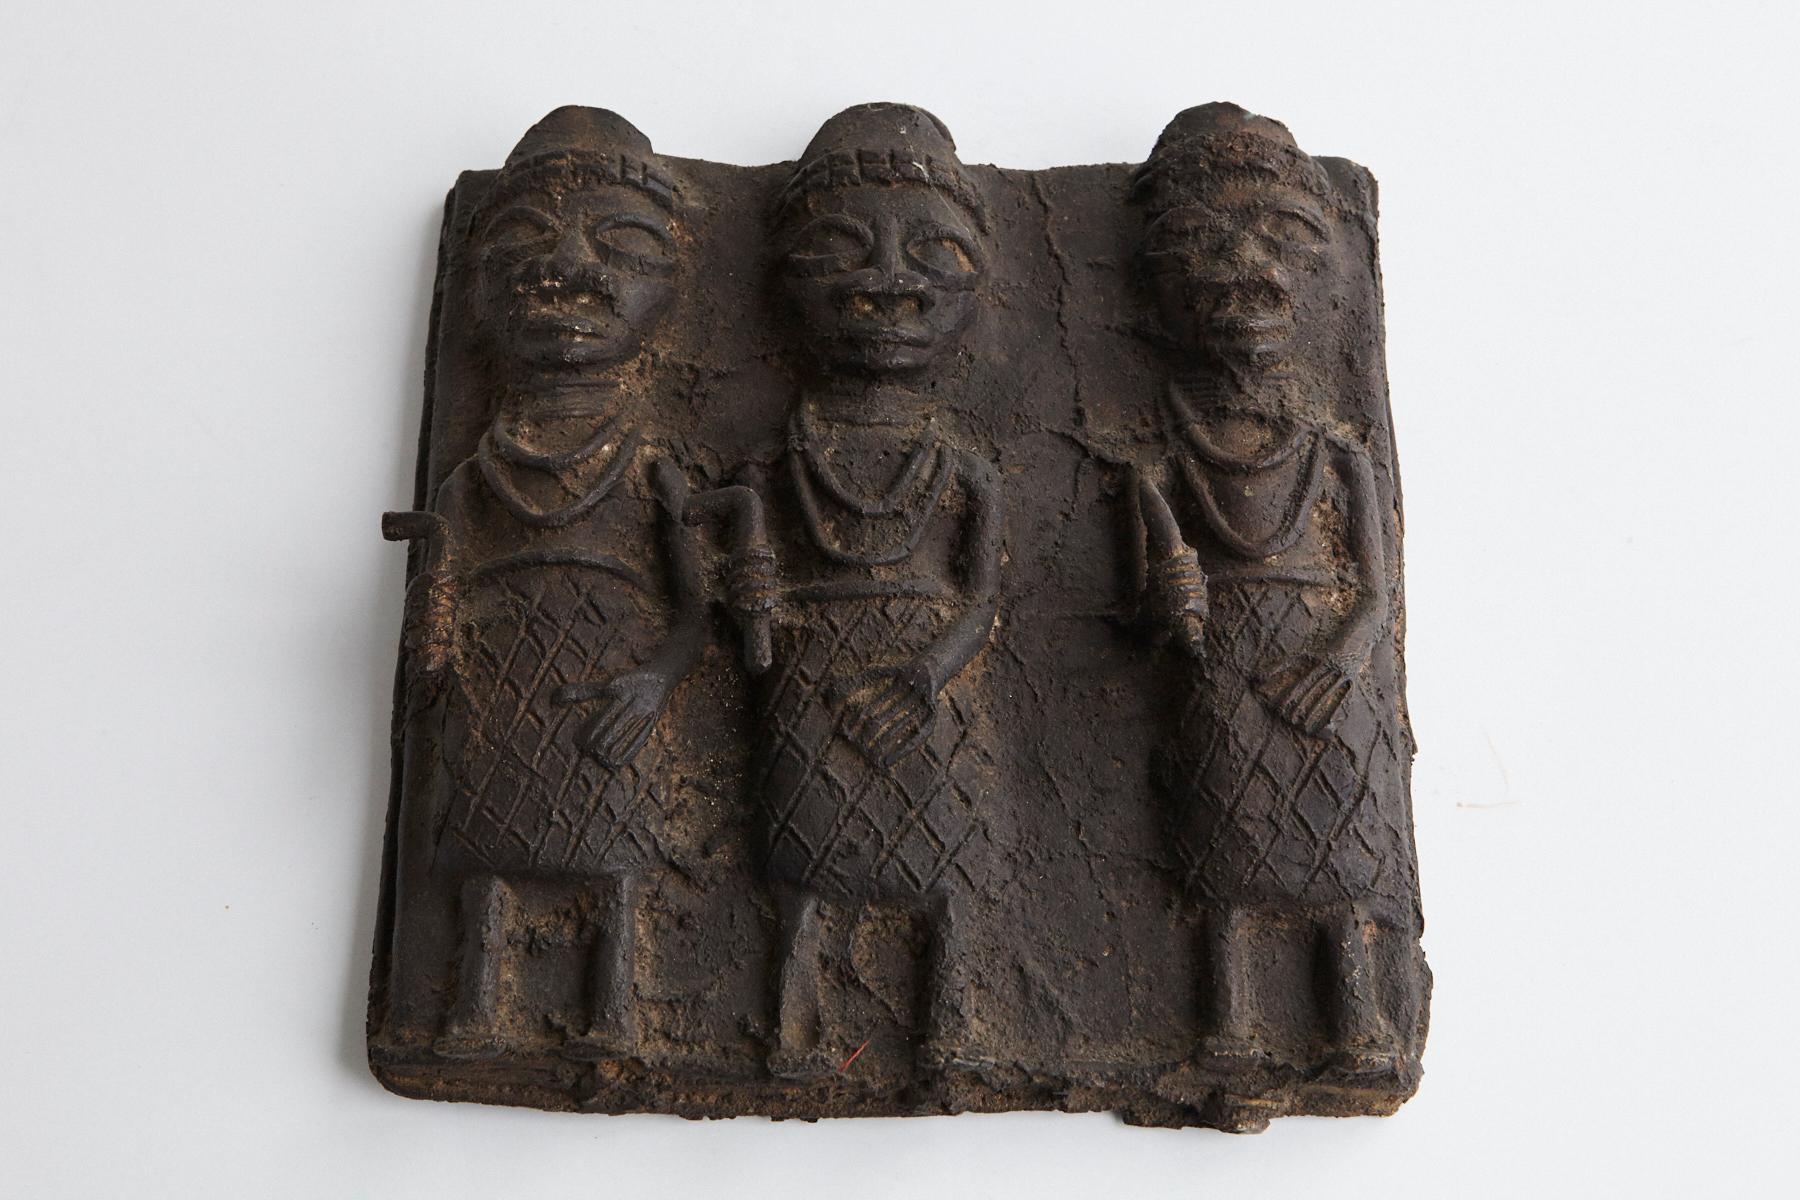 Intriguing cast bronze relief plaque from Benin, showing three guardians.
The plaque was modeled after ancient Benin bronzes but was made in the 20th century. The plaque is cast in bronze using the lost wax process.

The numbers are the inventory